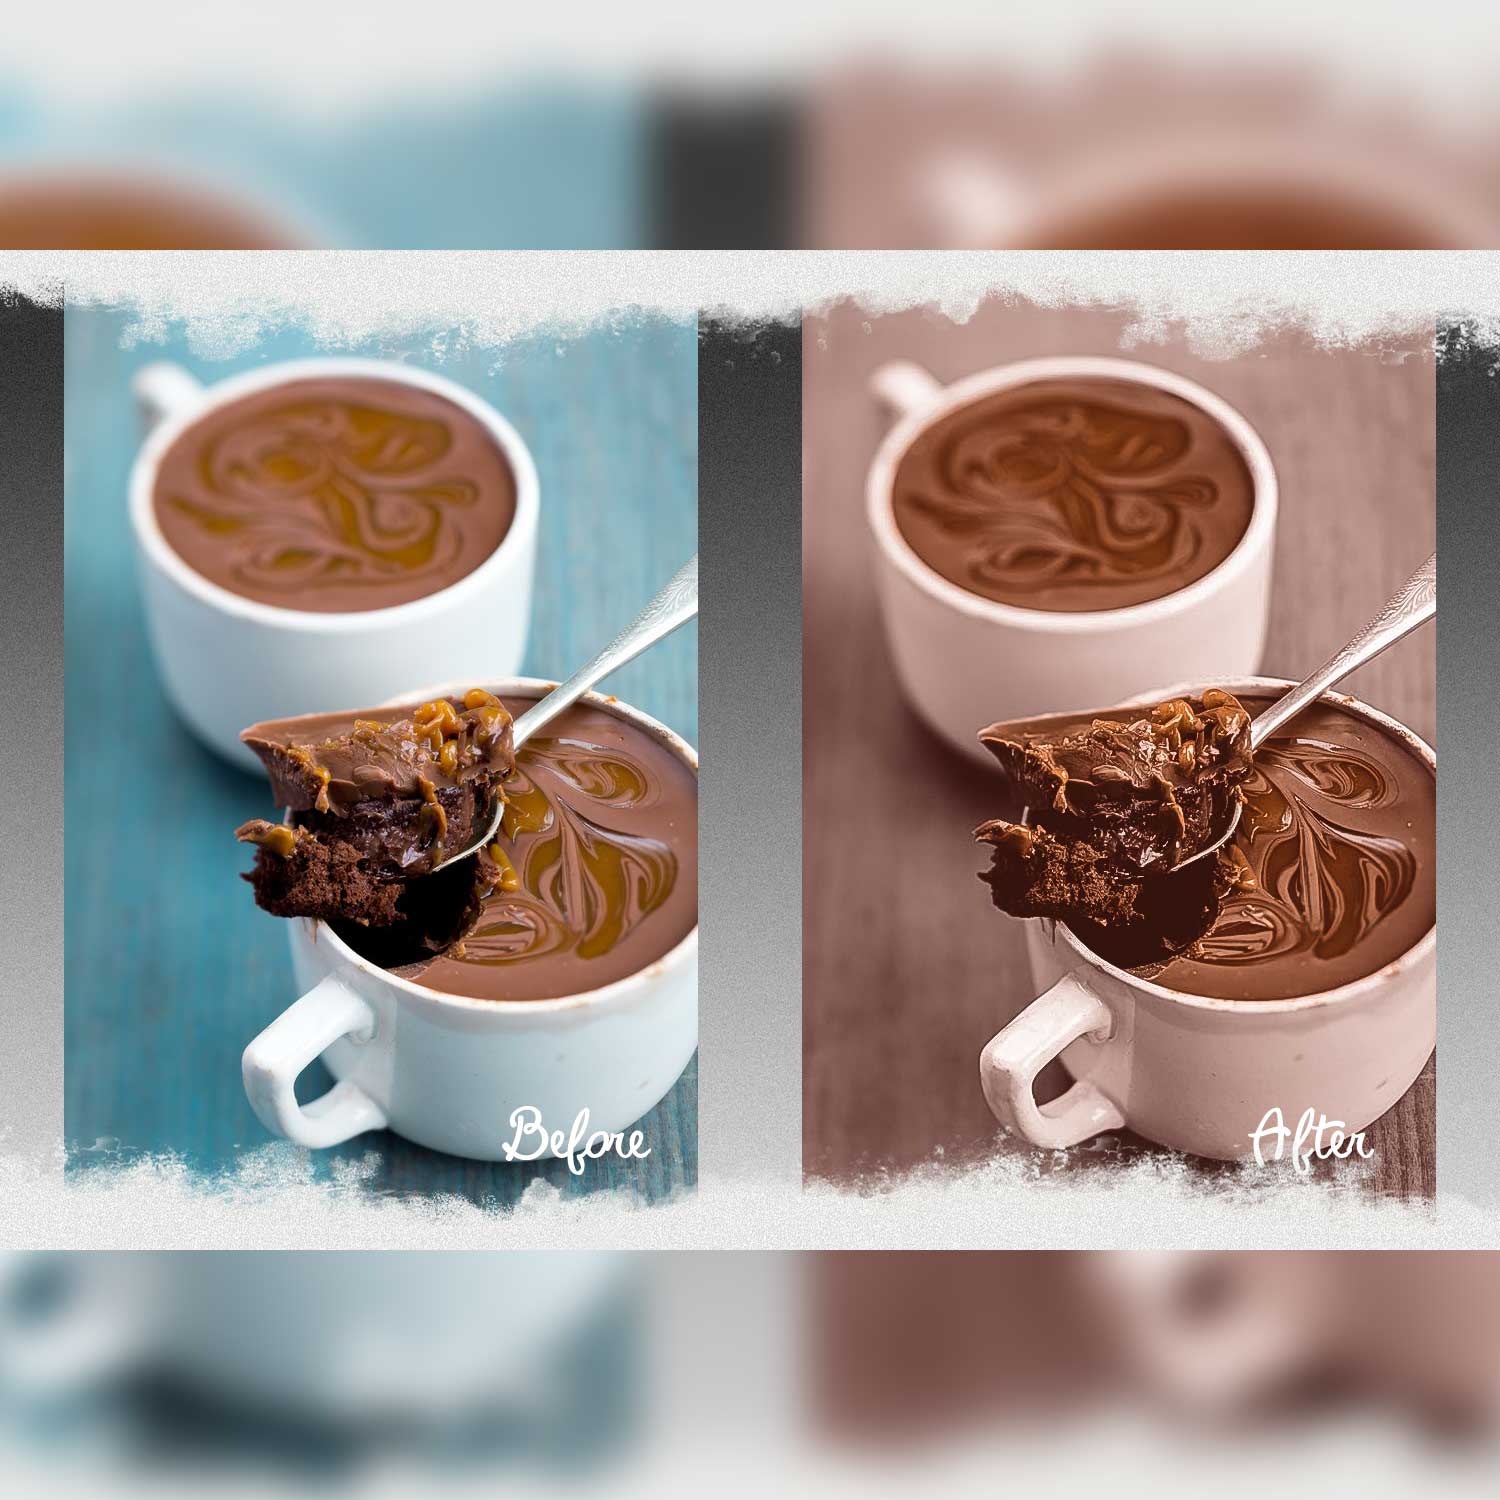 Bright And Warm Instagram Lightroom Presets Coffee.